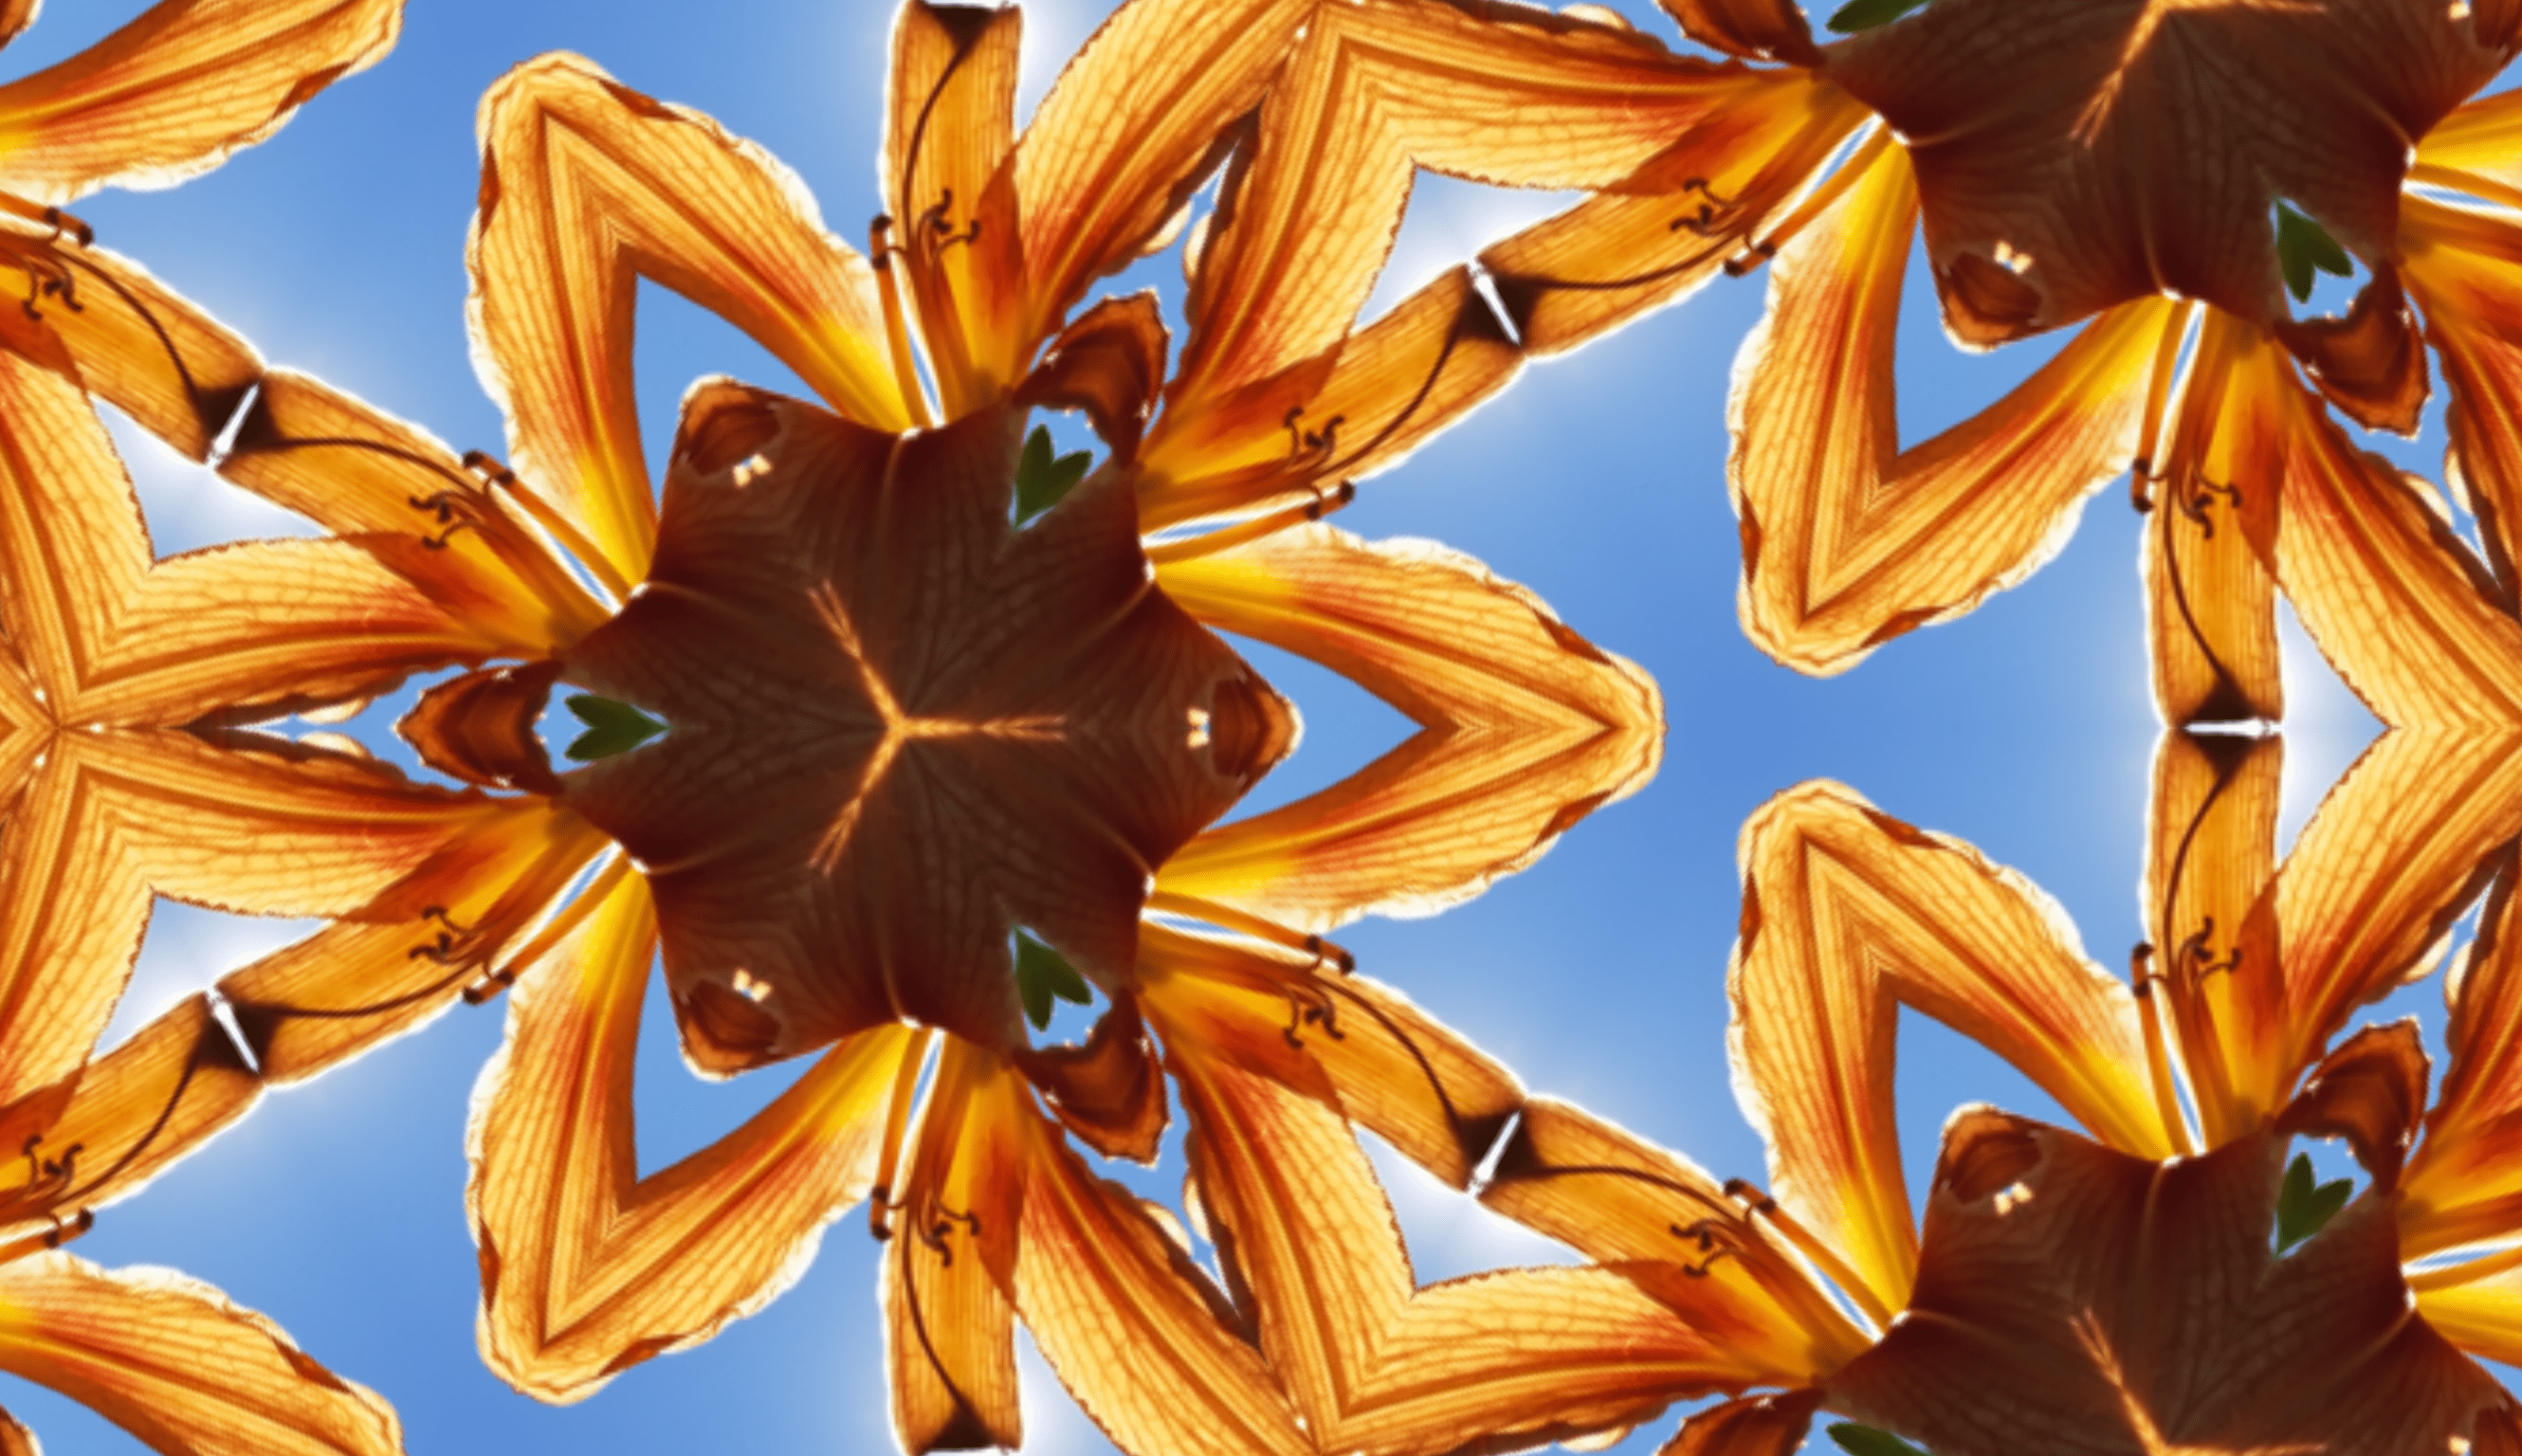 A decorative image of a pattern made from a backlit image of an orange lily.